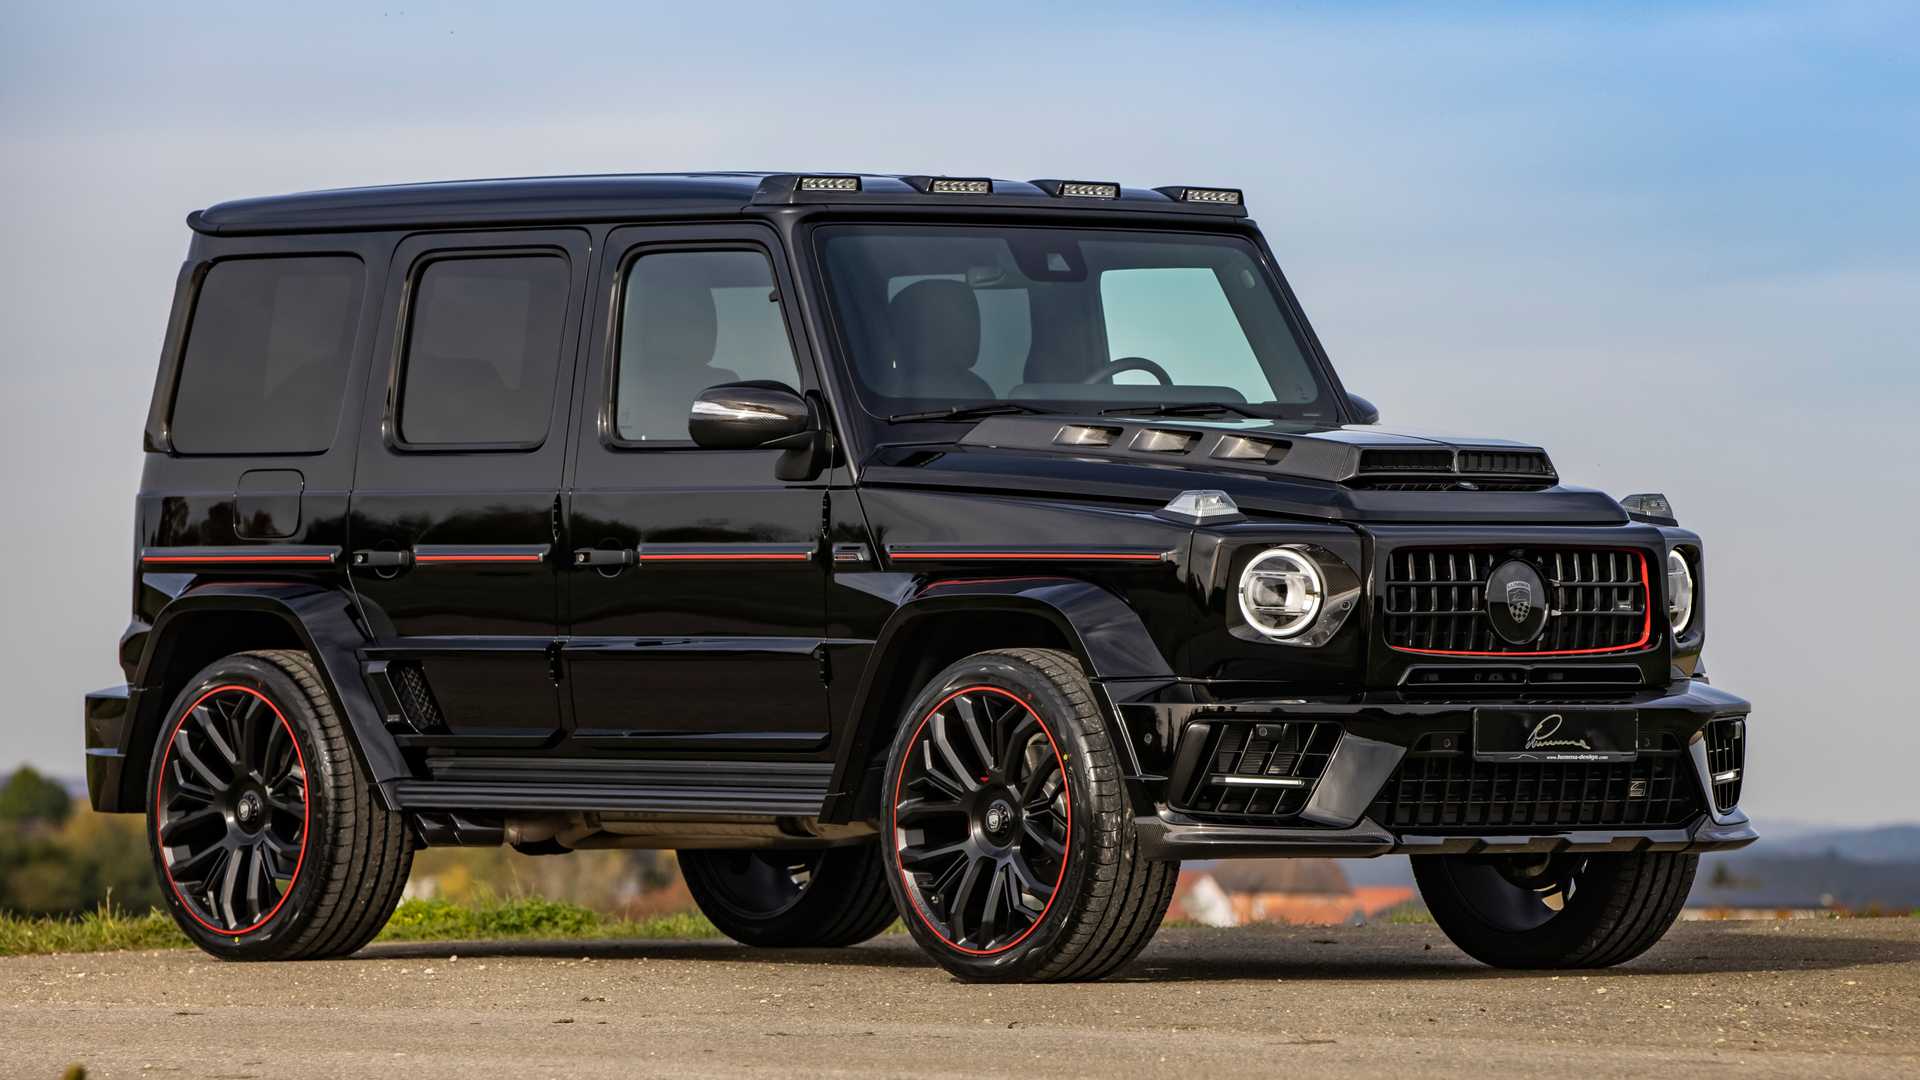 Mercedes G Class Muscled Up By Lumma With Custom Body, 24 Inch Wheels